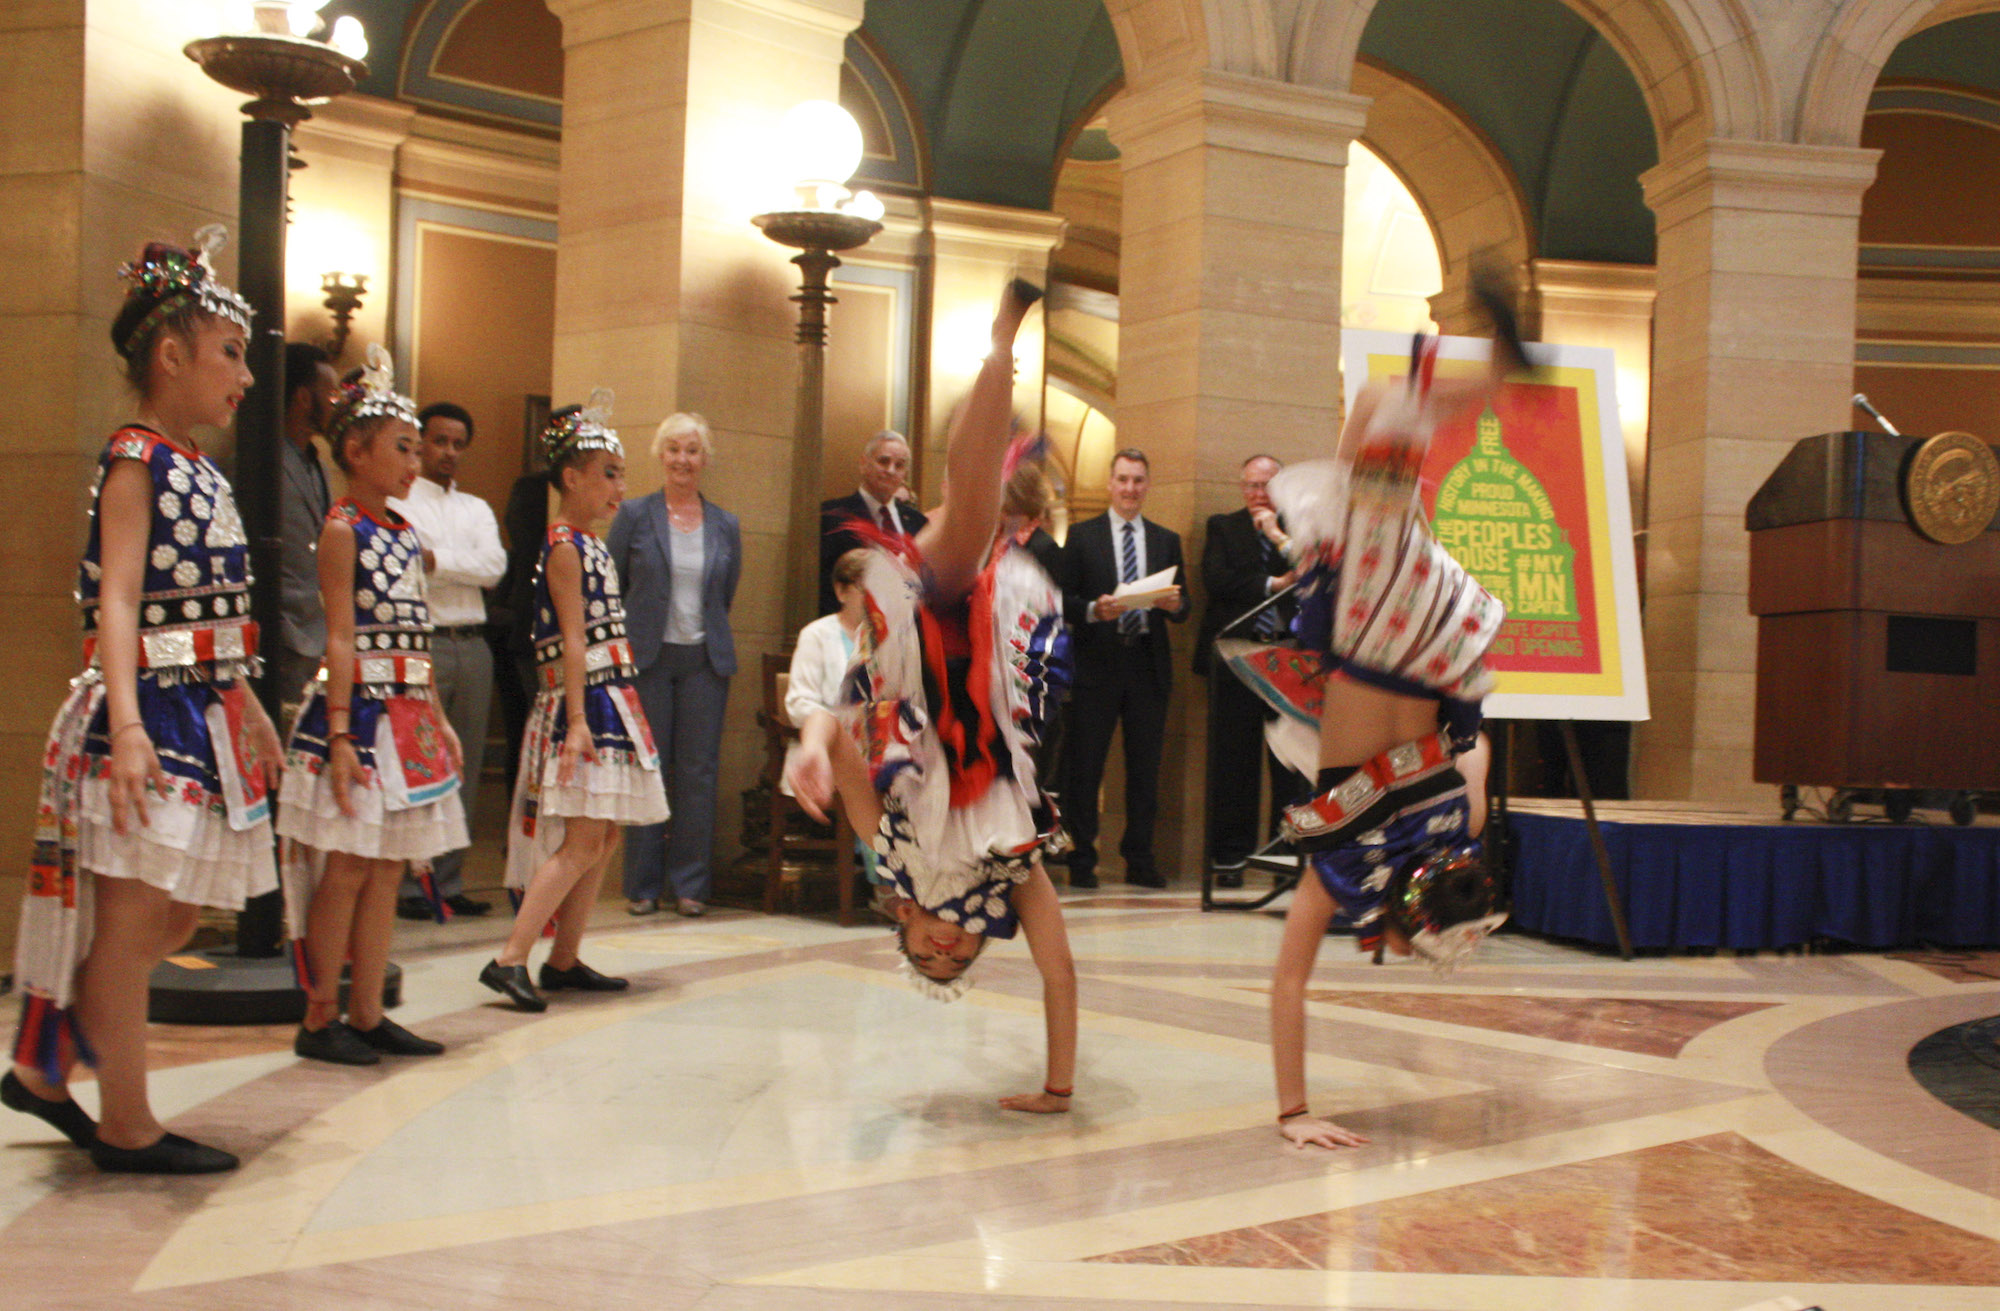 Dancers perform at the Minnesota State Capitol